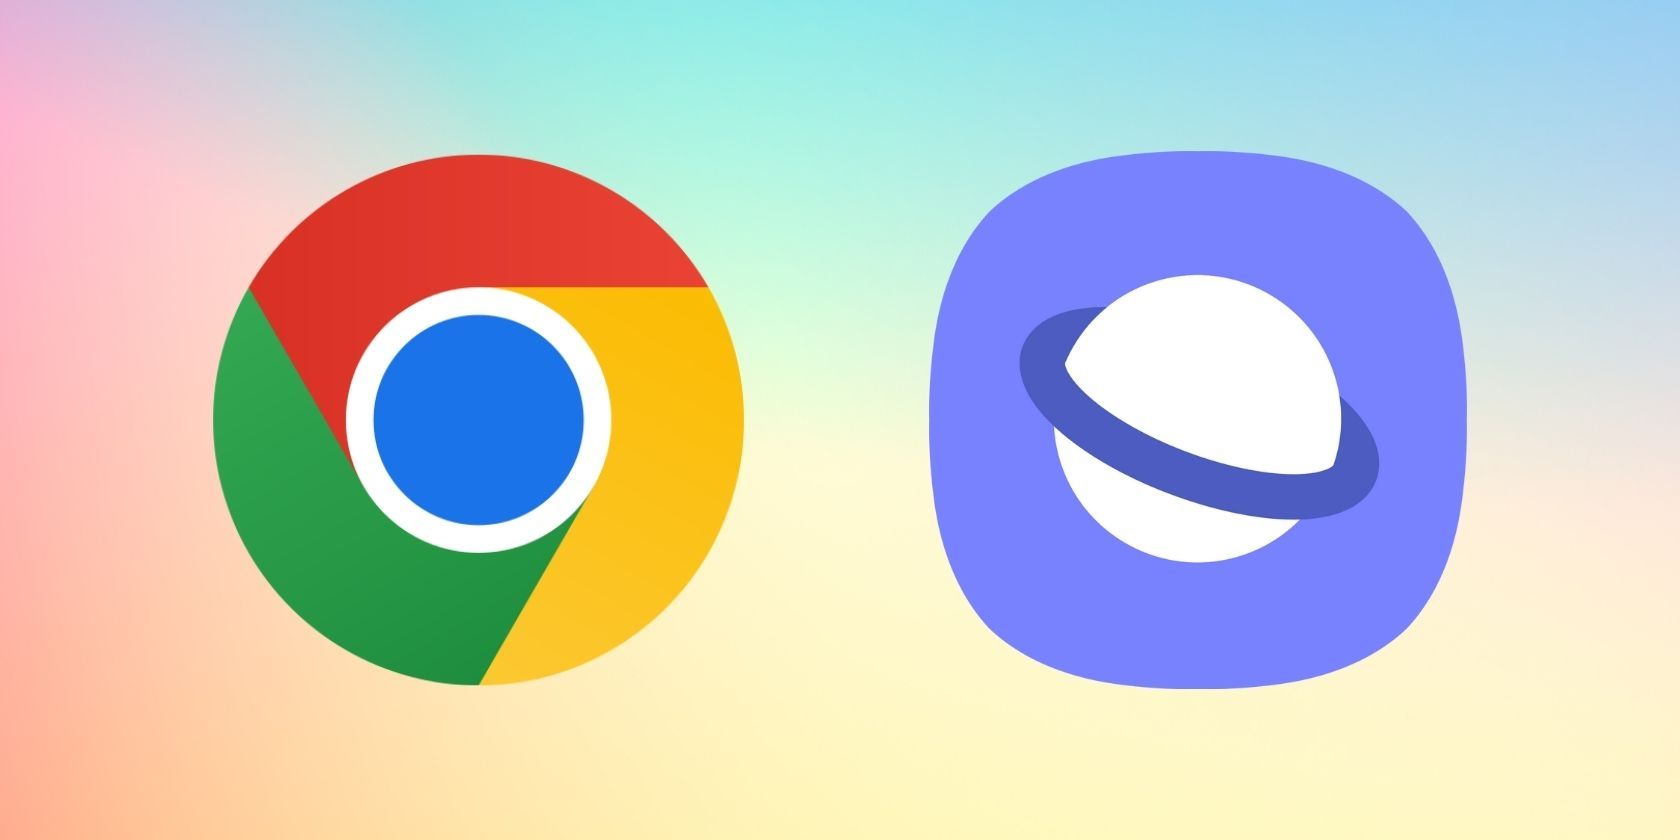 Google Chrome vs. Samsung Internet: Which Android Browser Better?